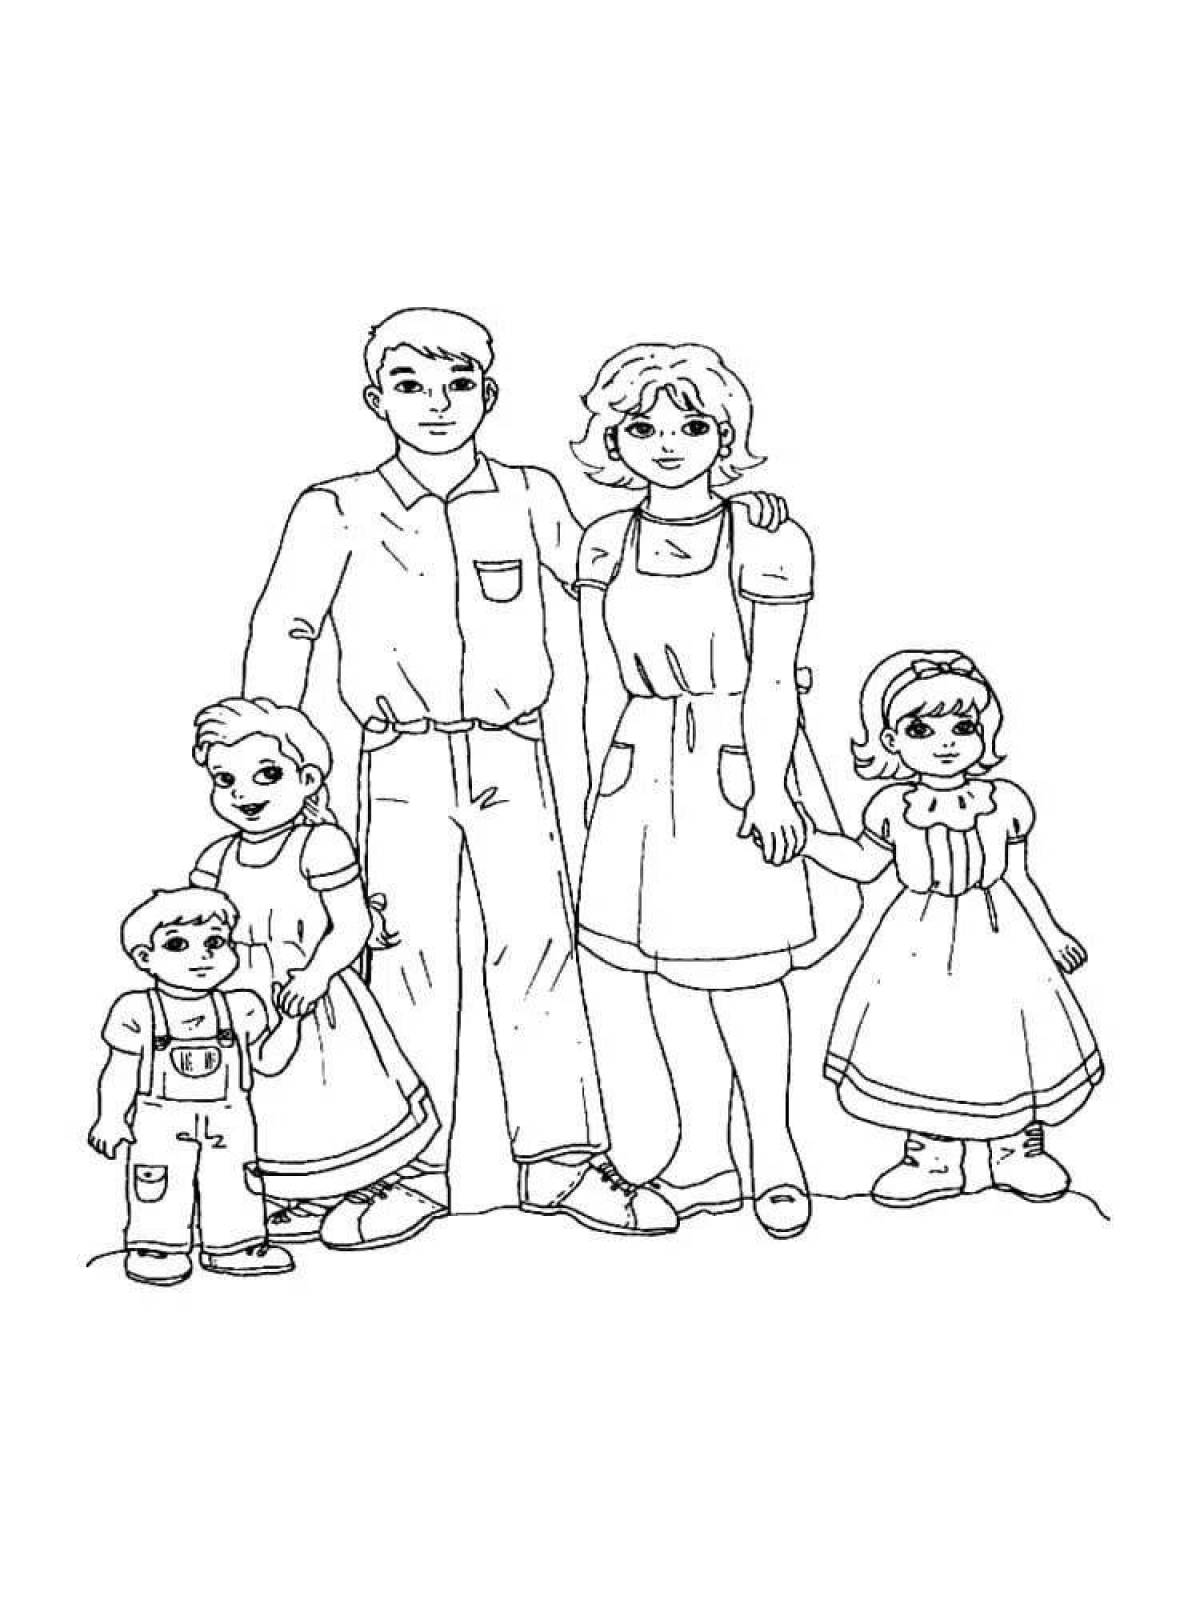 Delightful coloring book my family of 4